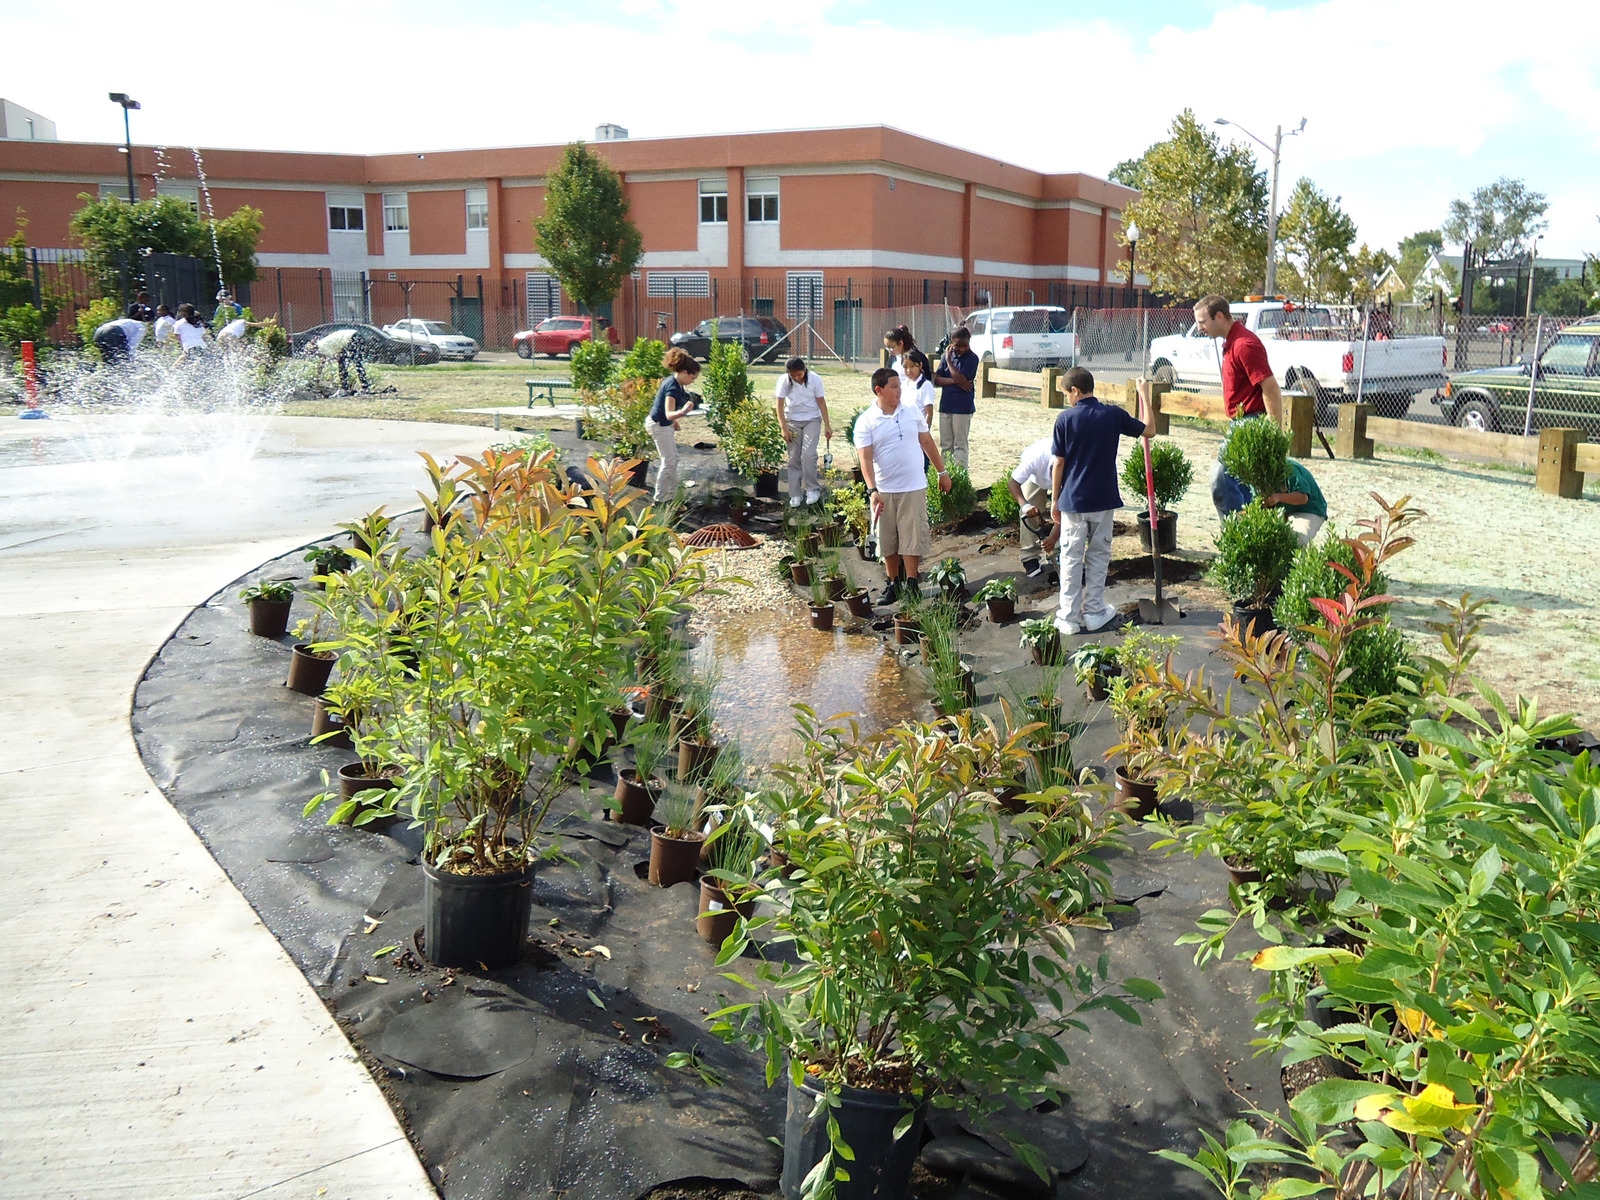 Through a coordinated effort with the city of Bridgeport and Luis Marin school, a planting day was arranged in which students helped install plants surrounding the splash pad. Aside from educating students on the importance of rain gardens, this event also allowed students to take ownership in caring for the park.